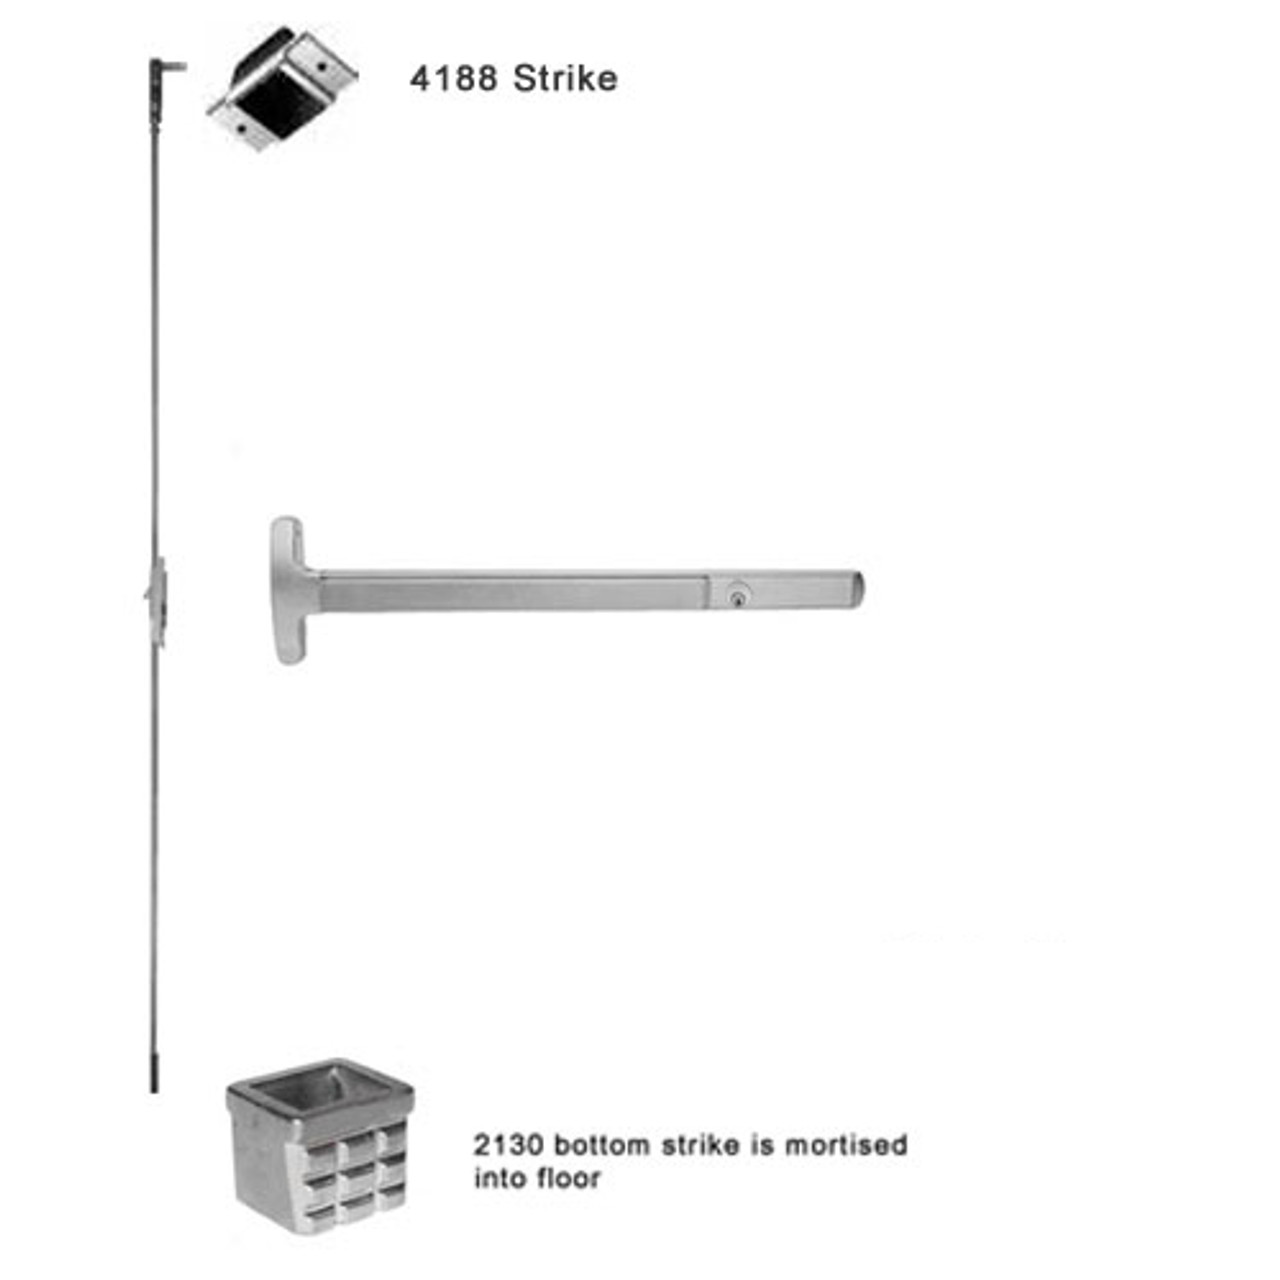 CD24-C-L-DANE-US26-3-LHR Falcon 24 Series Concealed Vertical Rod Device with 712L Dane Lever Trim in Polished Chrome